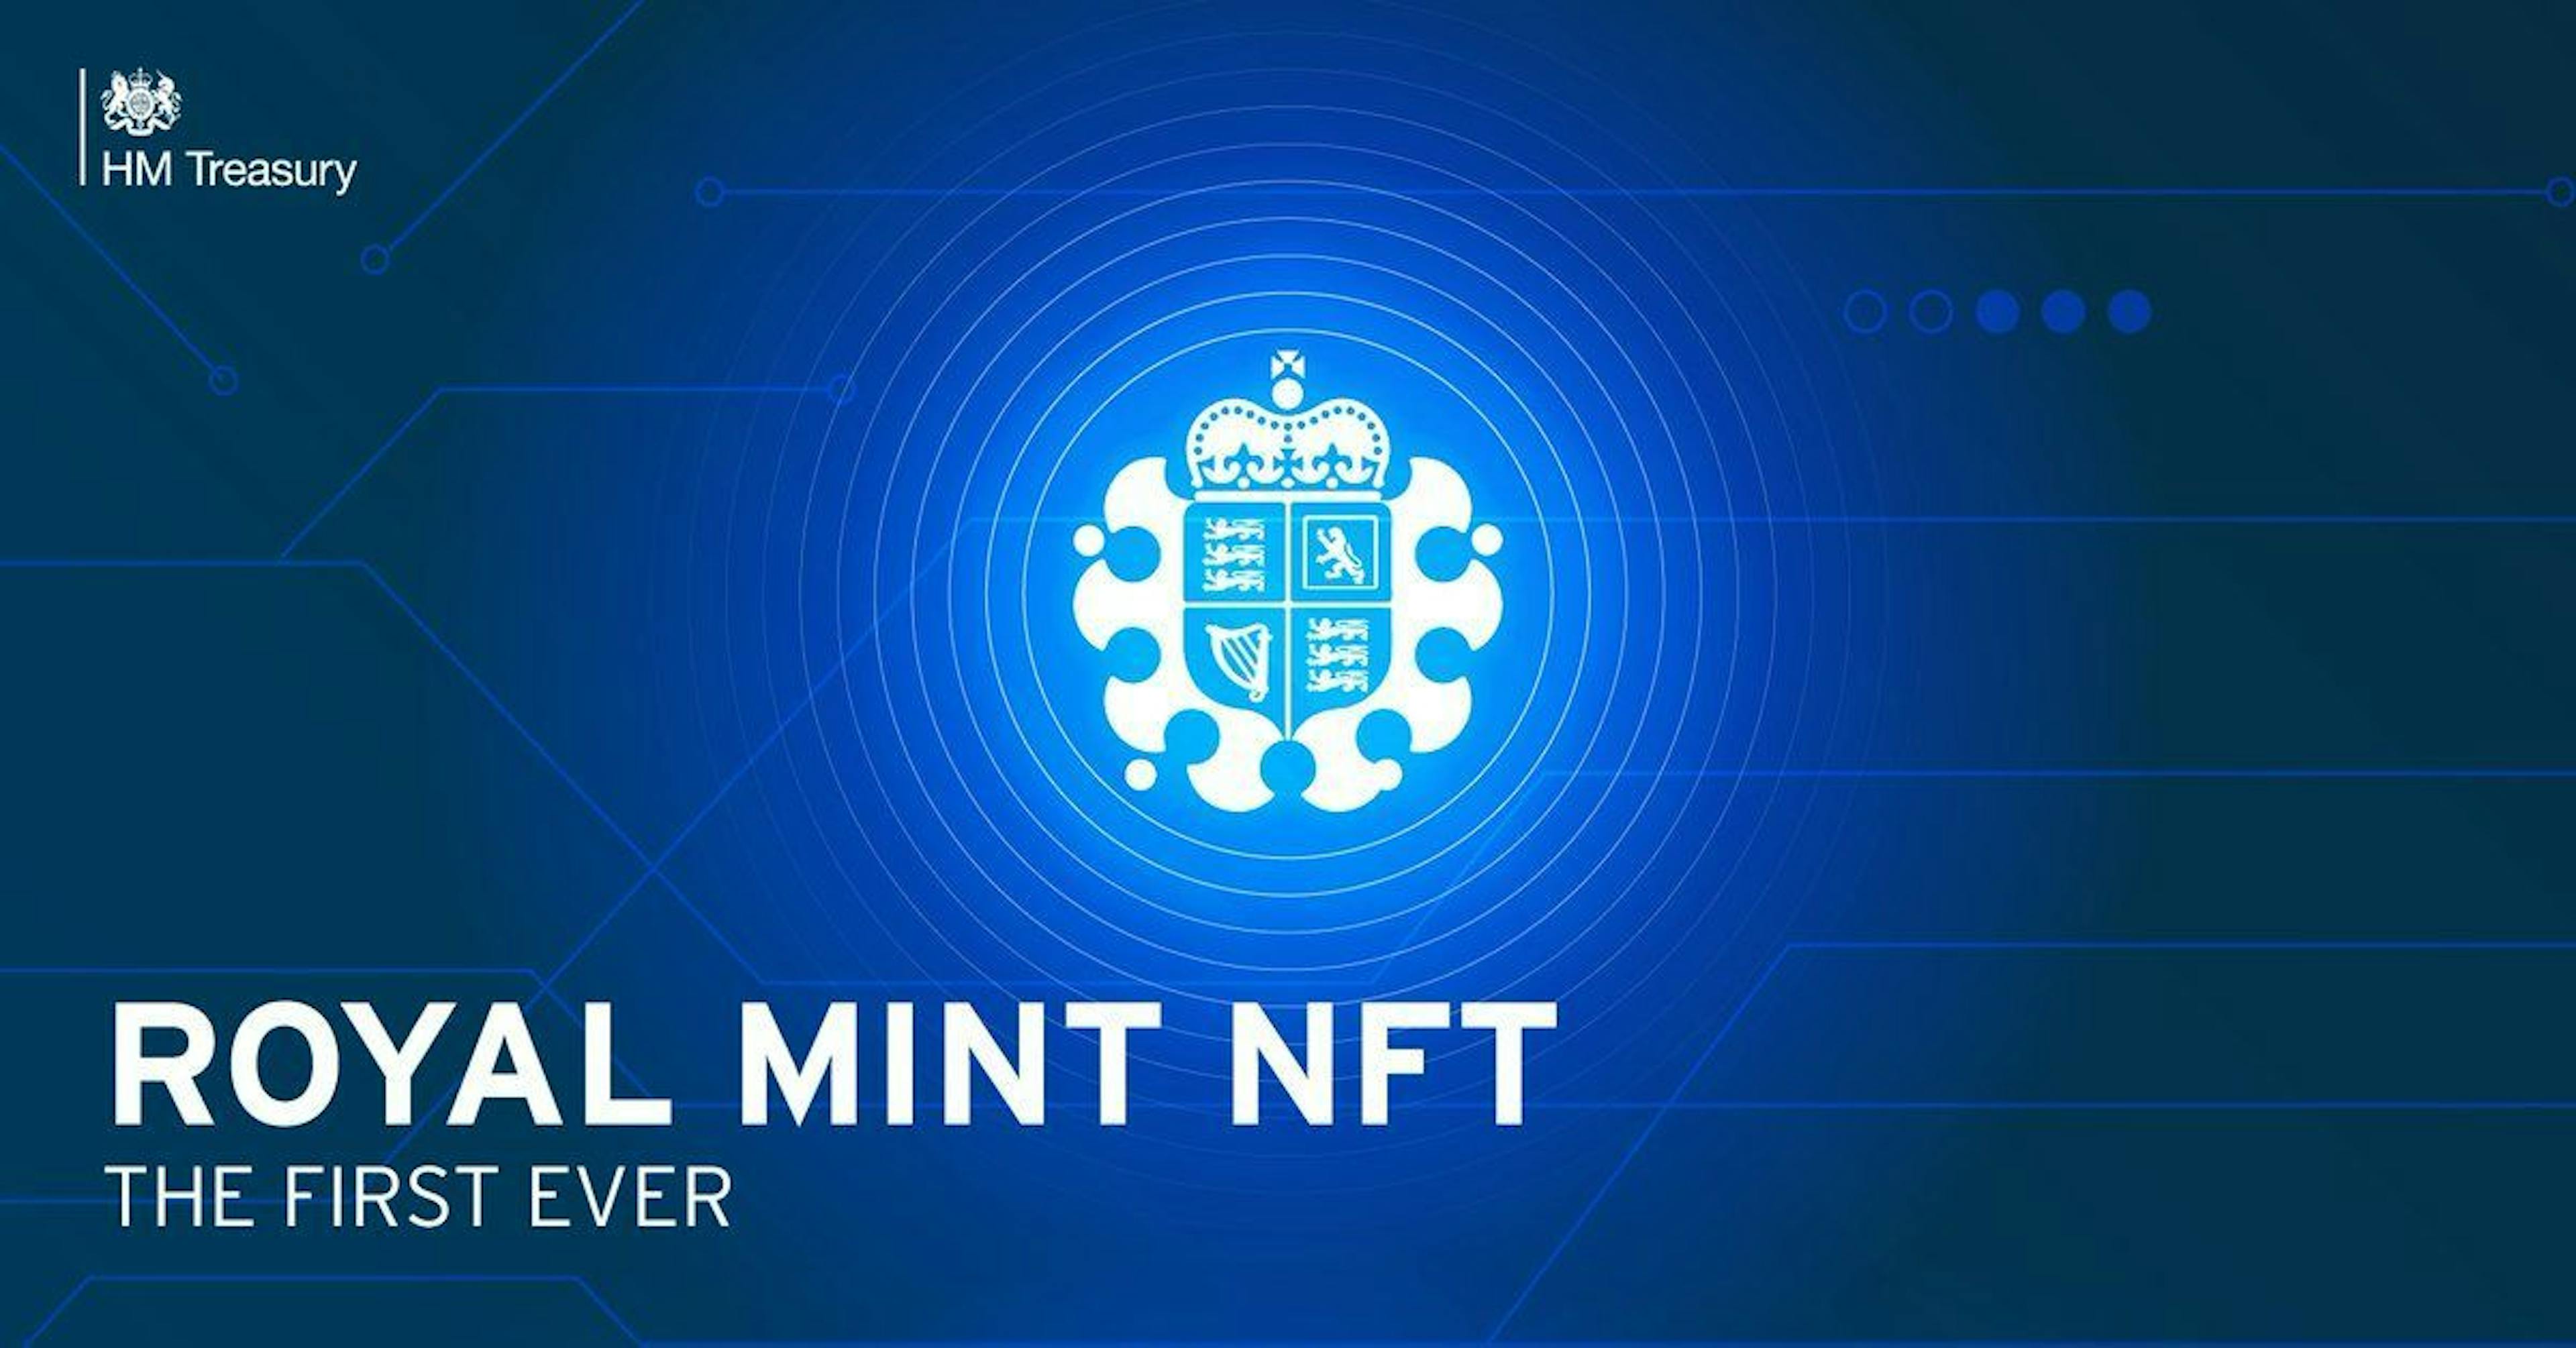 /what-the-uk-royal-mints-official-nft-means-for-global-nft-policy-adoption feature image